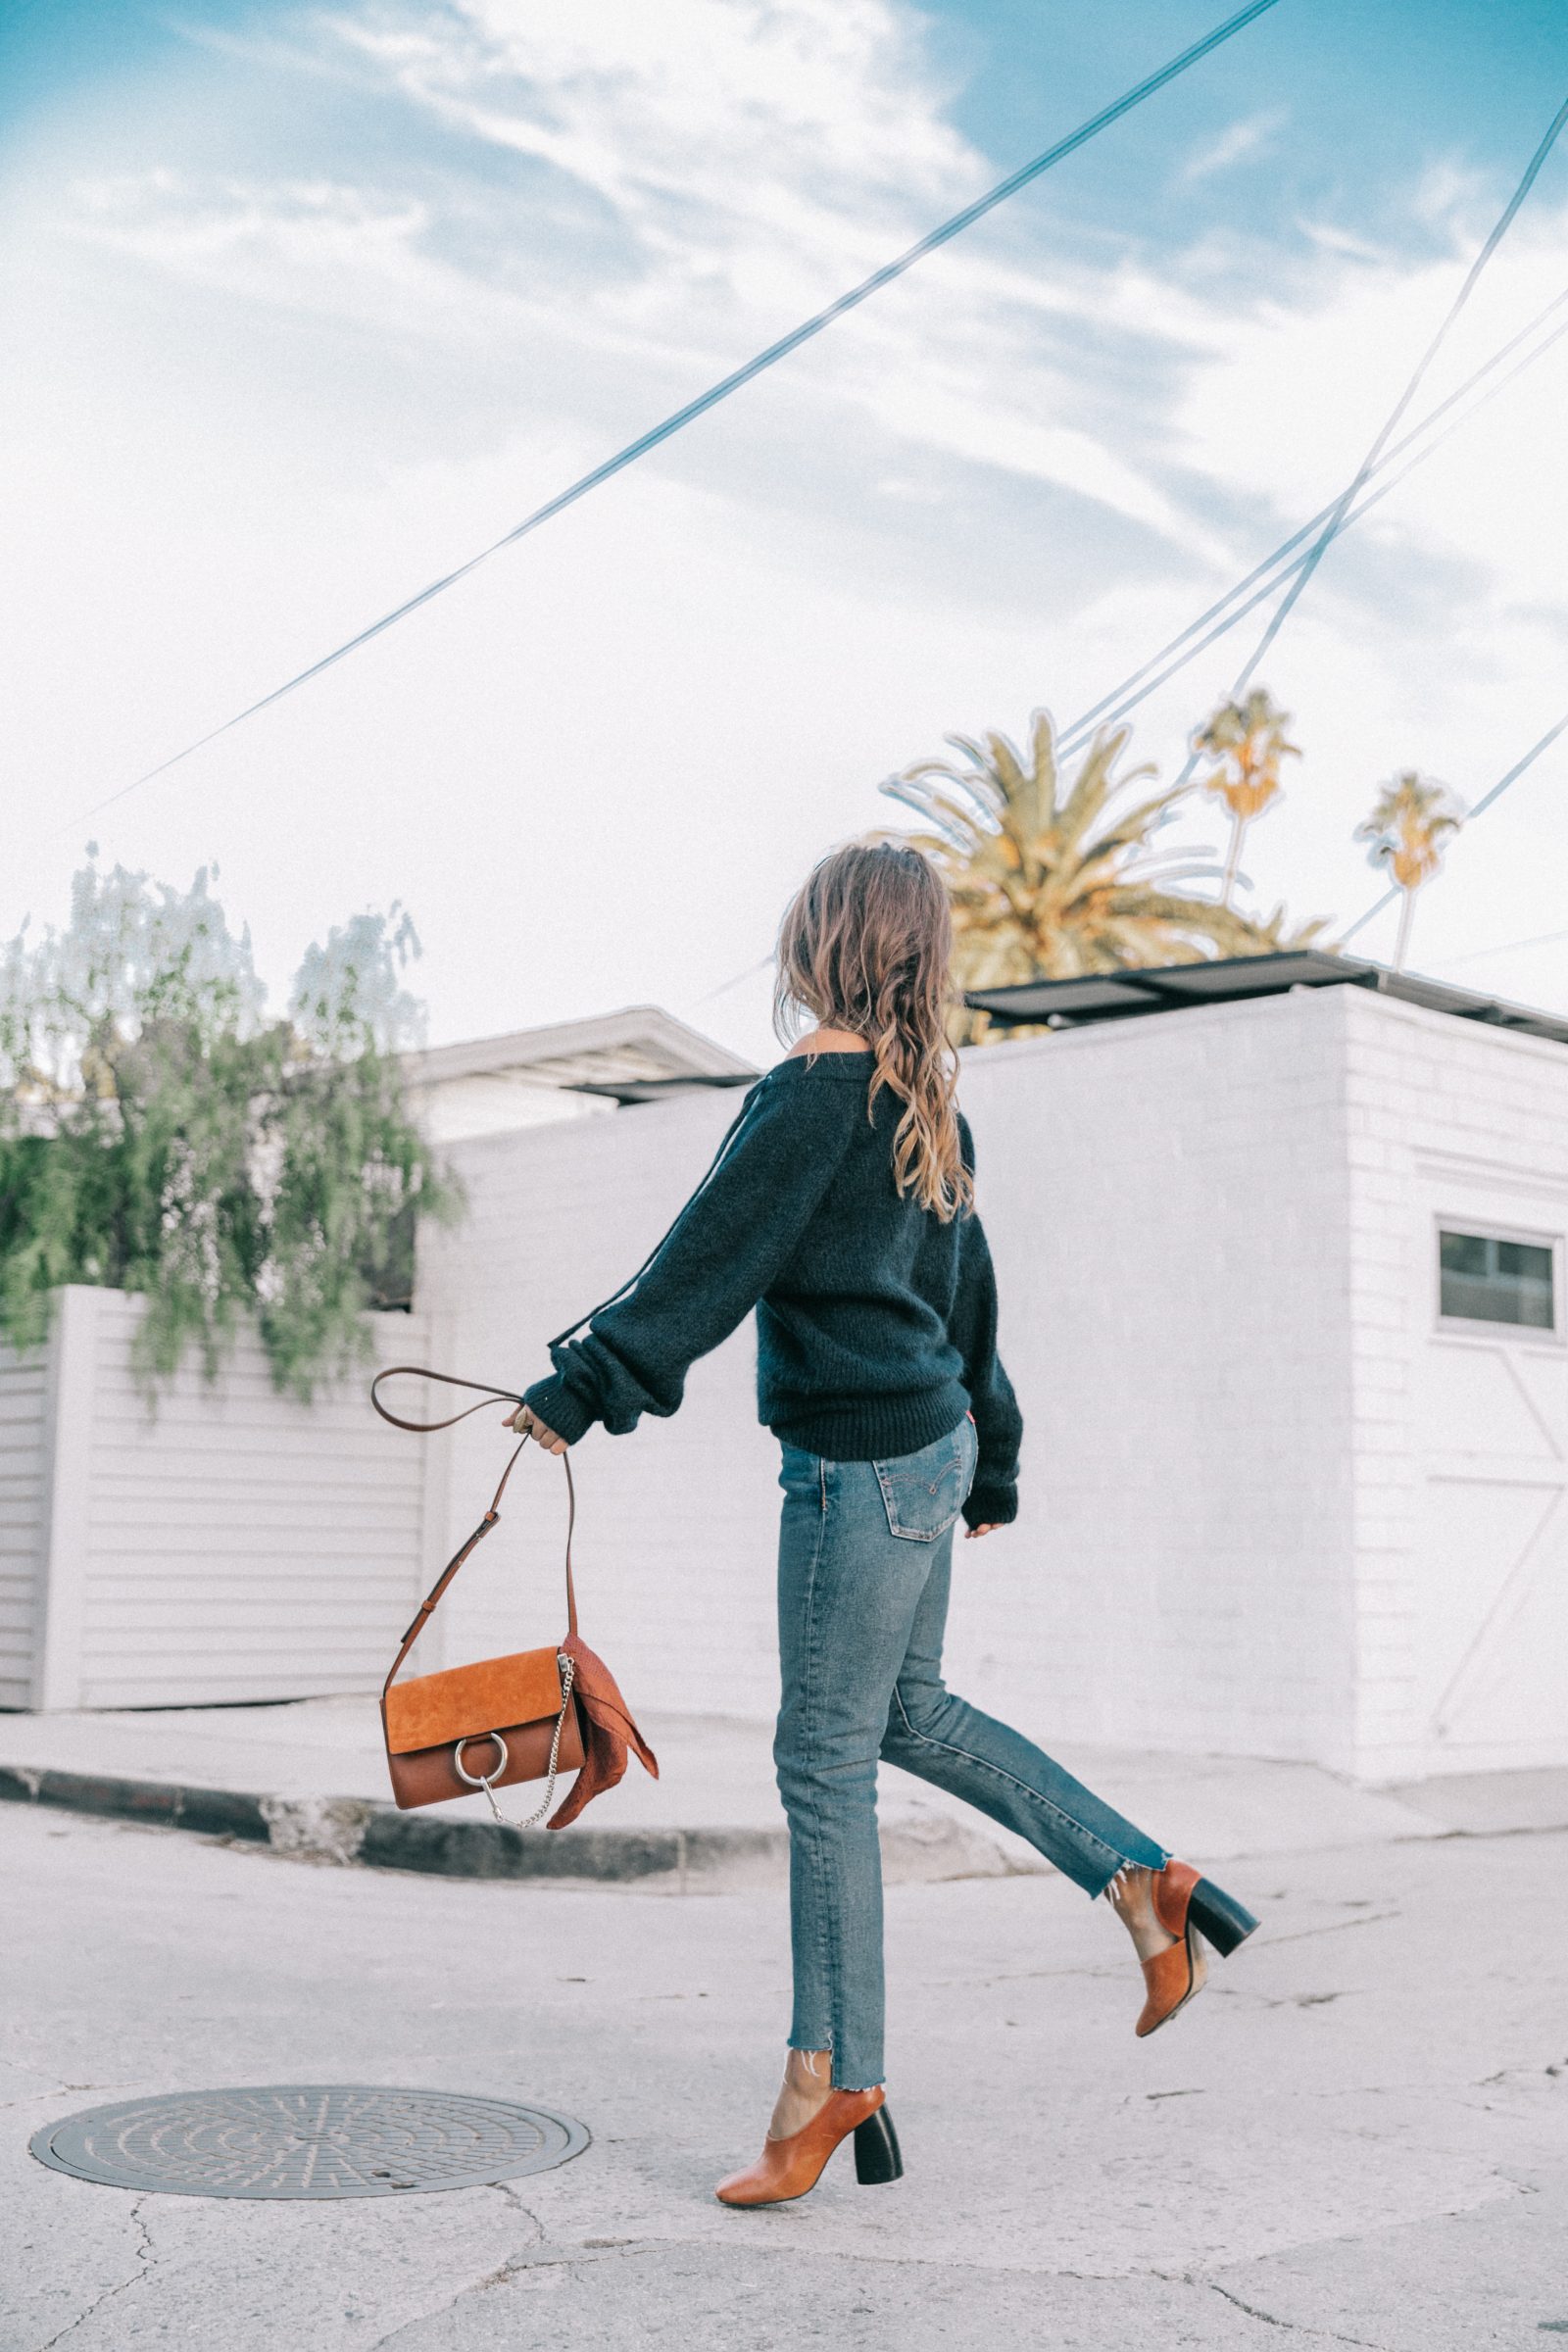 venice_beach-knotted_jumper-levis_jeans-chloe_bag-mango_shoes-horn_necklaces-outfit-street_style-los_angeles-collage_vintage-142